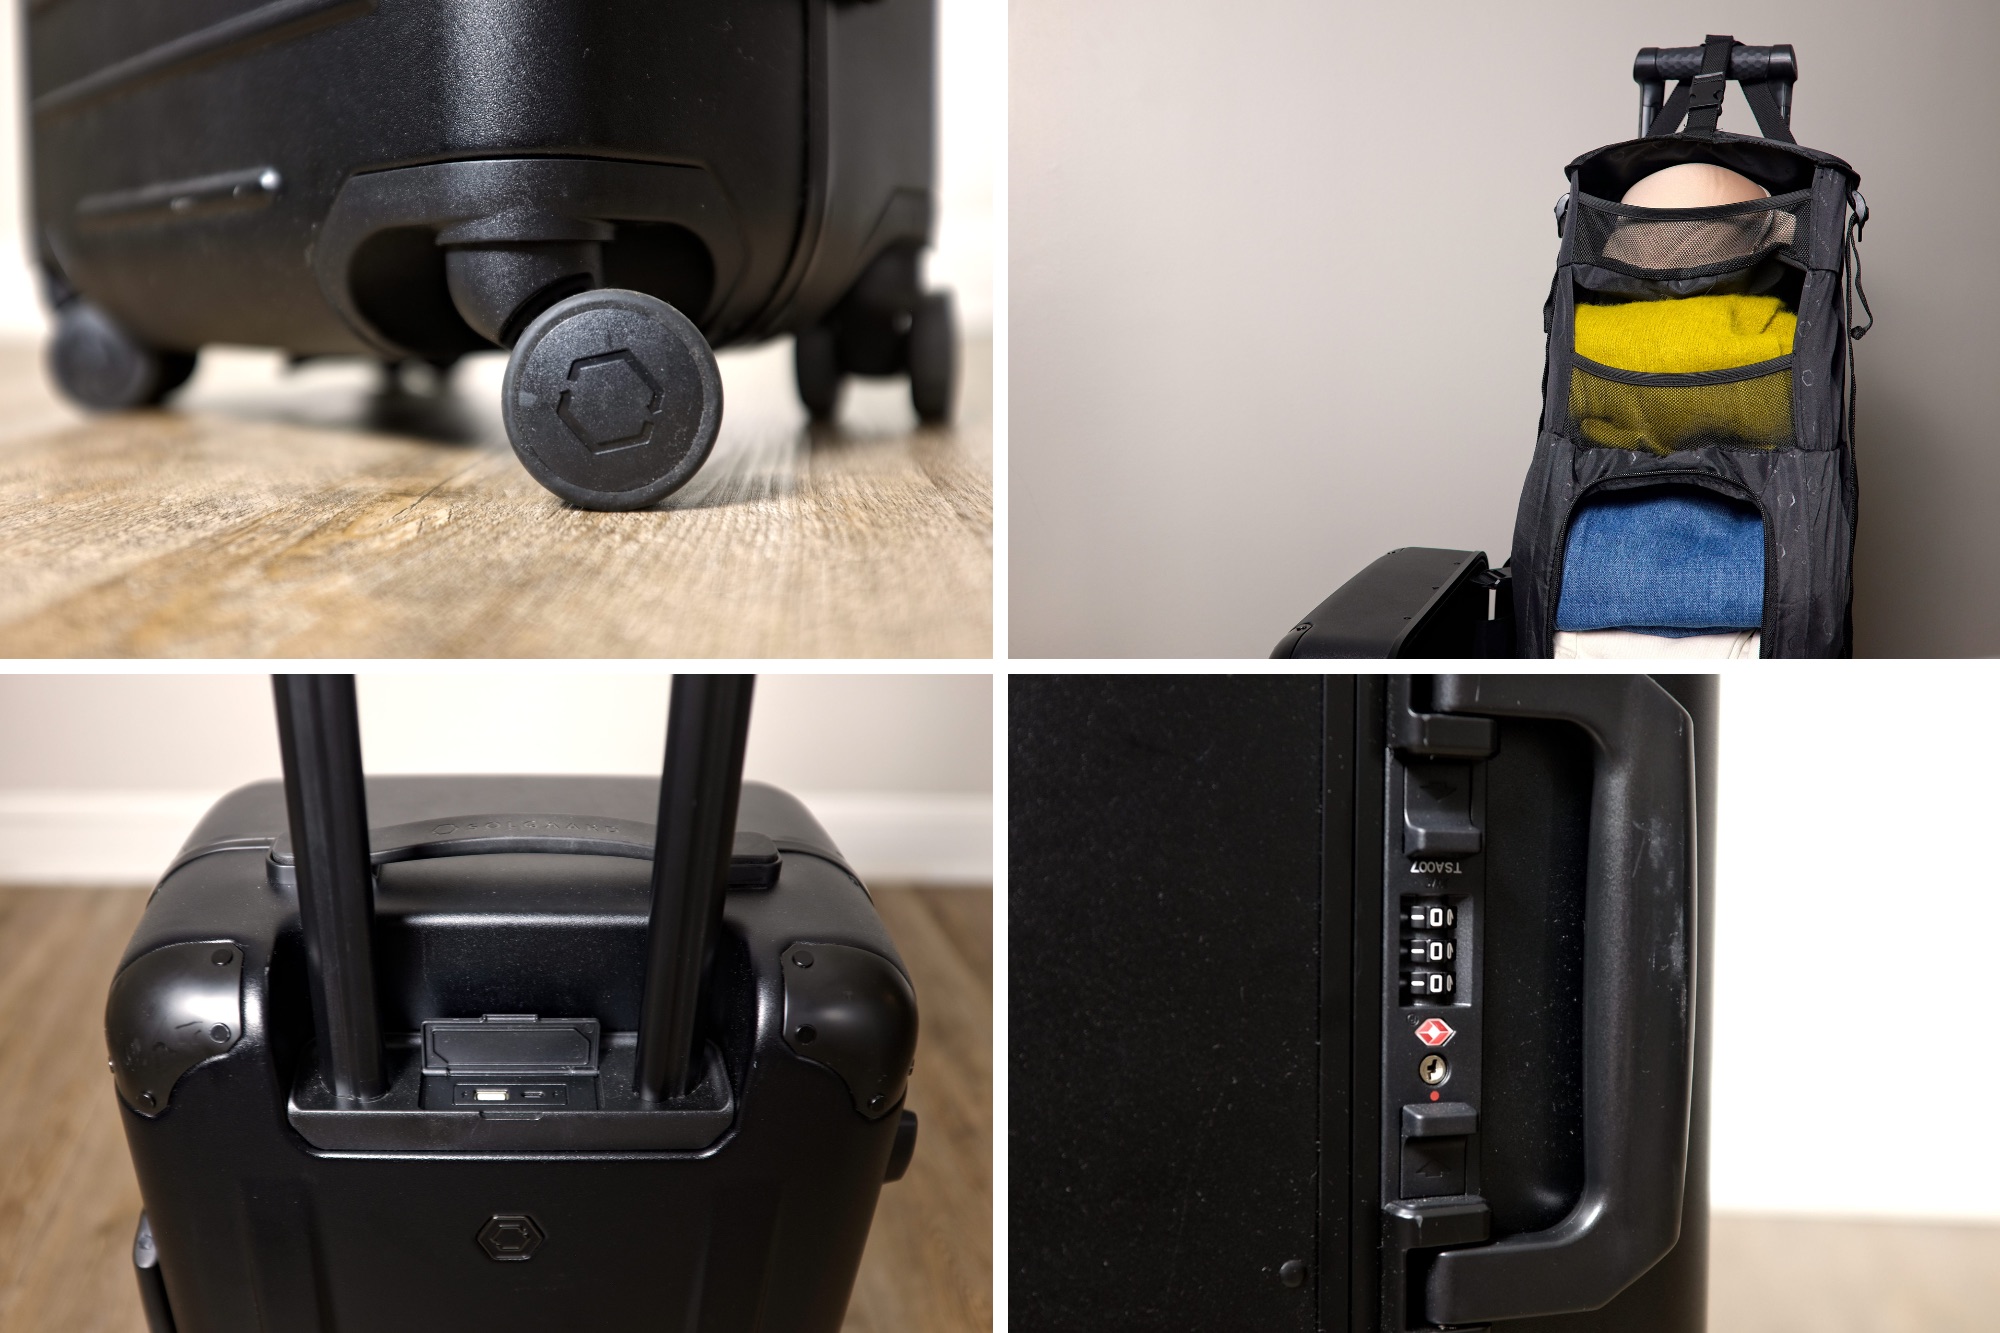 Four images showing the Carry-On Closet's wheels, closet, lock, and charging port